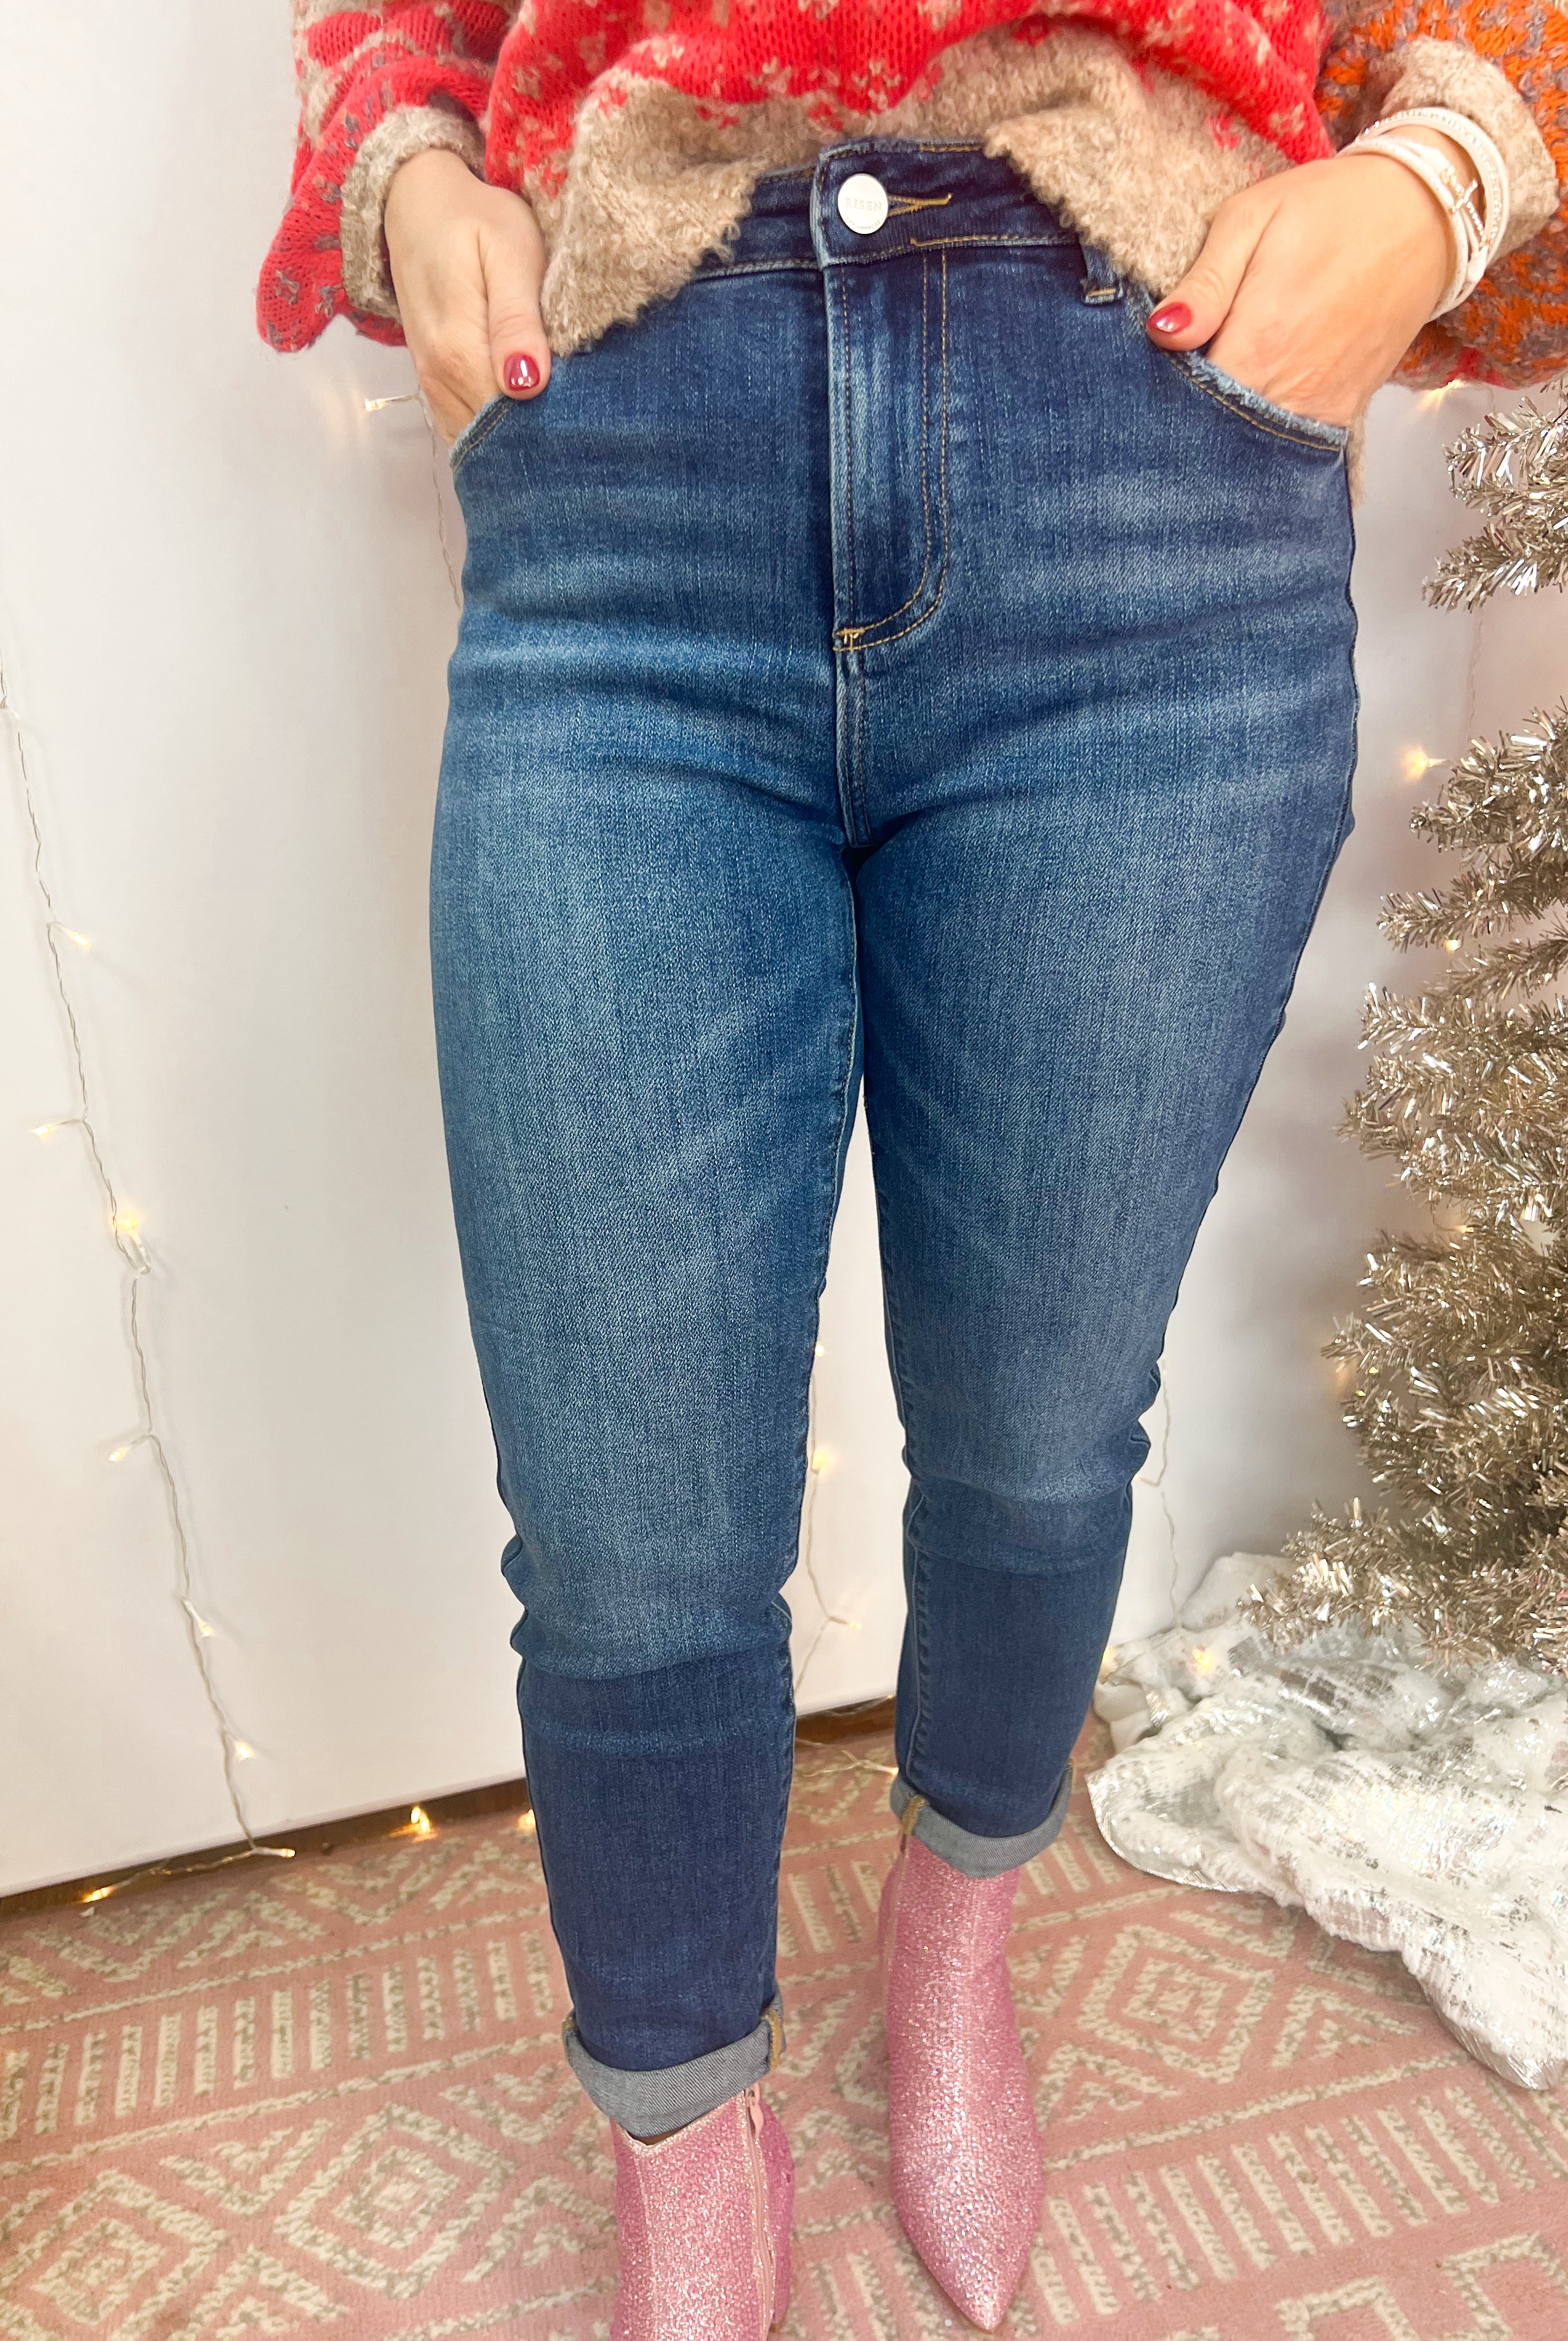 RISEN - High Rise Rolled Up Relaxed Skinny-Jeans-Risen-The Lovely Closet, Women's Fashion Boutique in Alexandria, KY